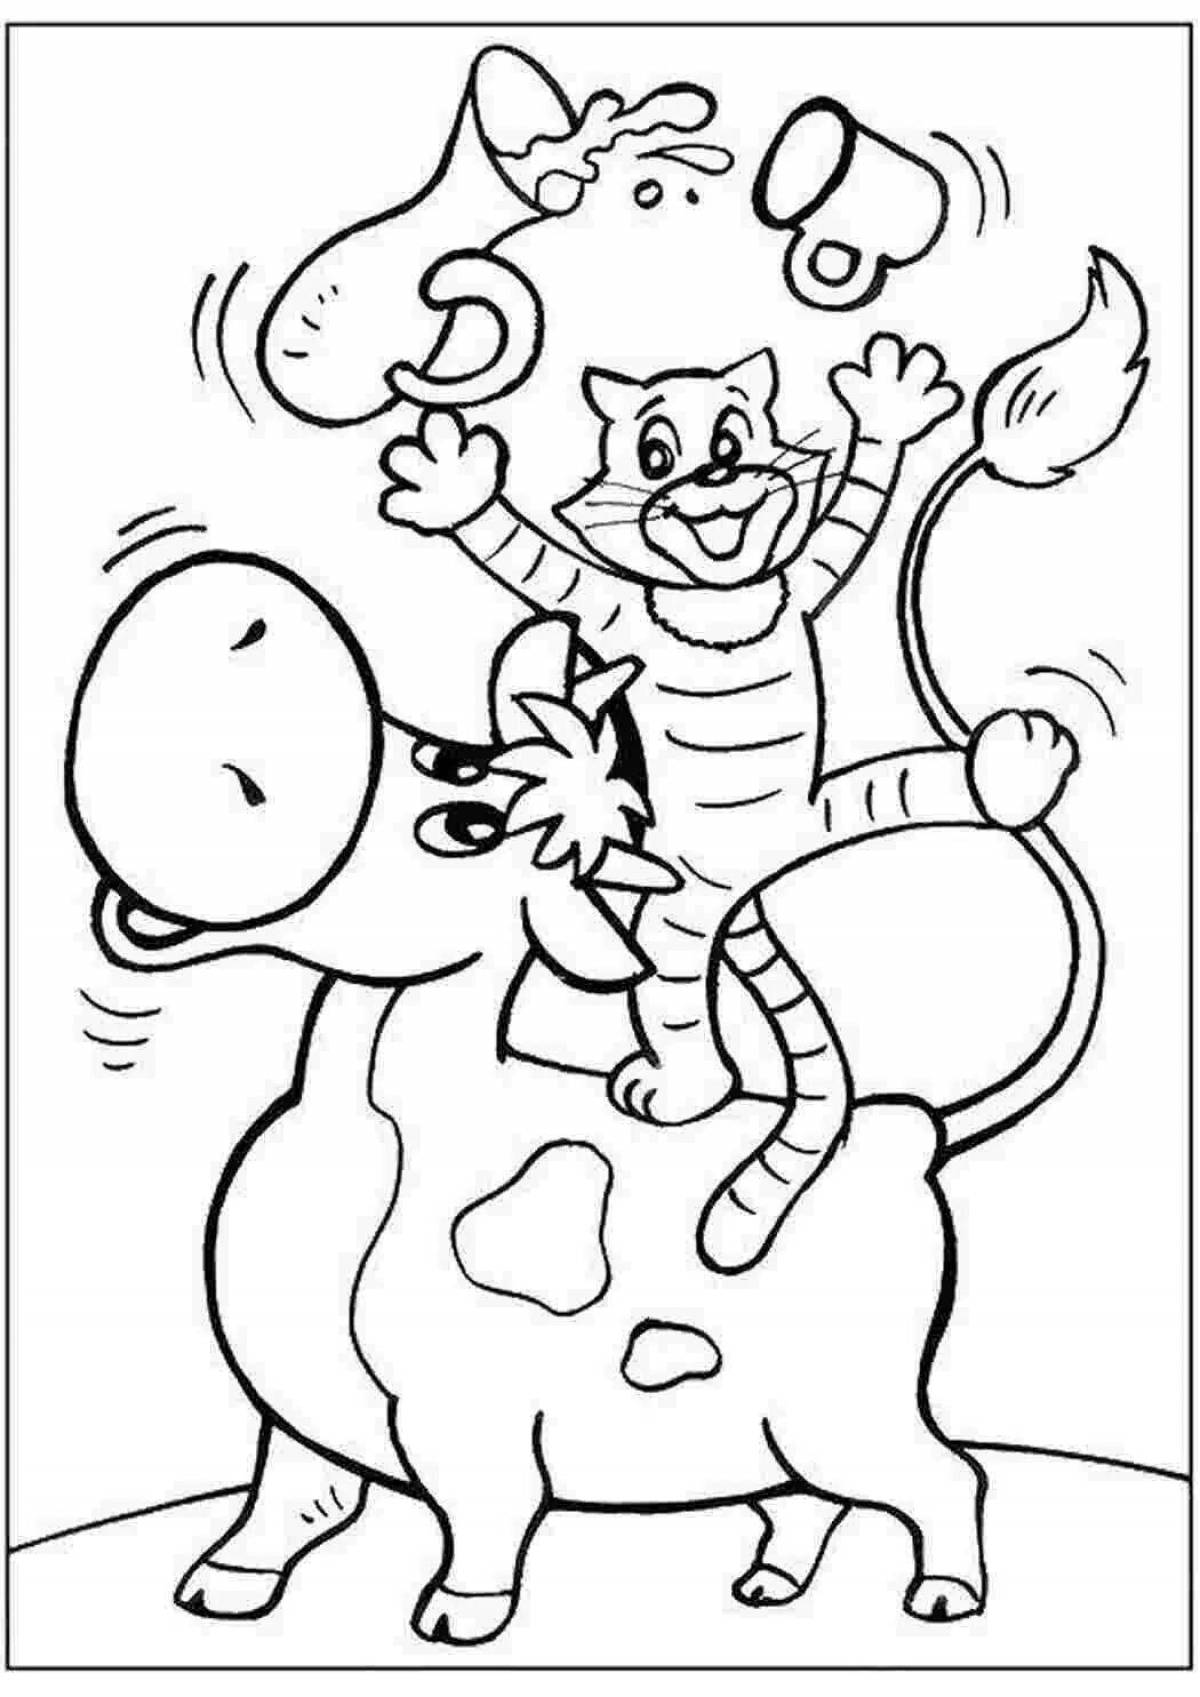 Inspirational coloring page for buttermilk